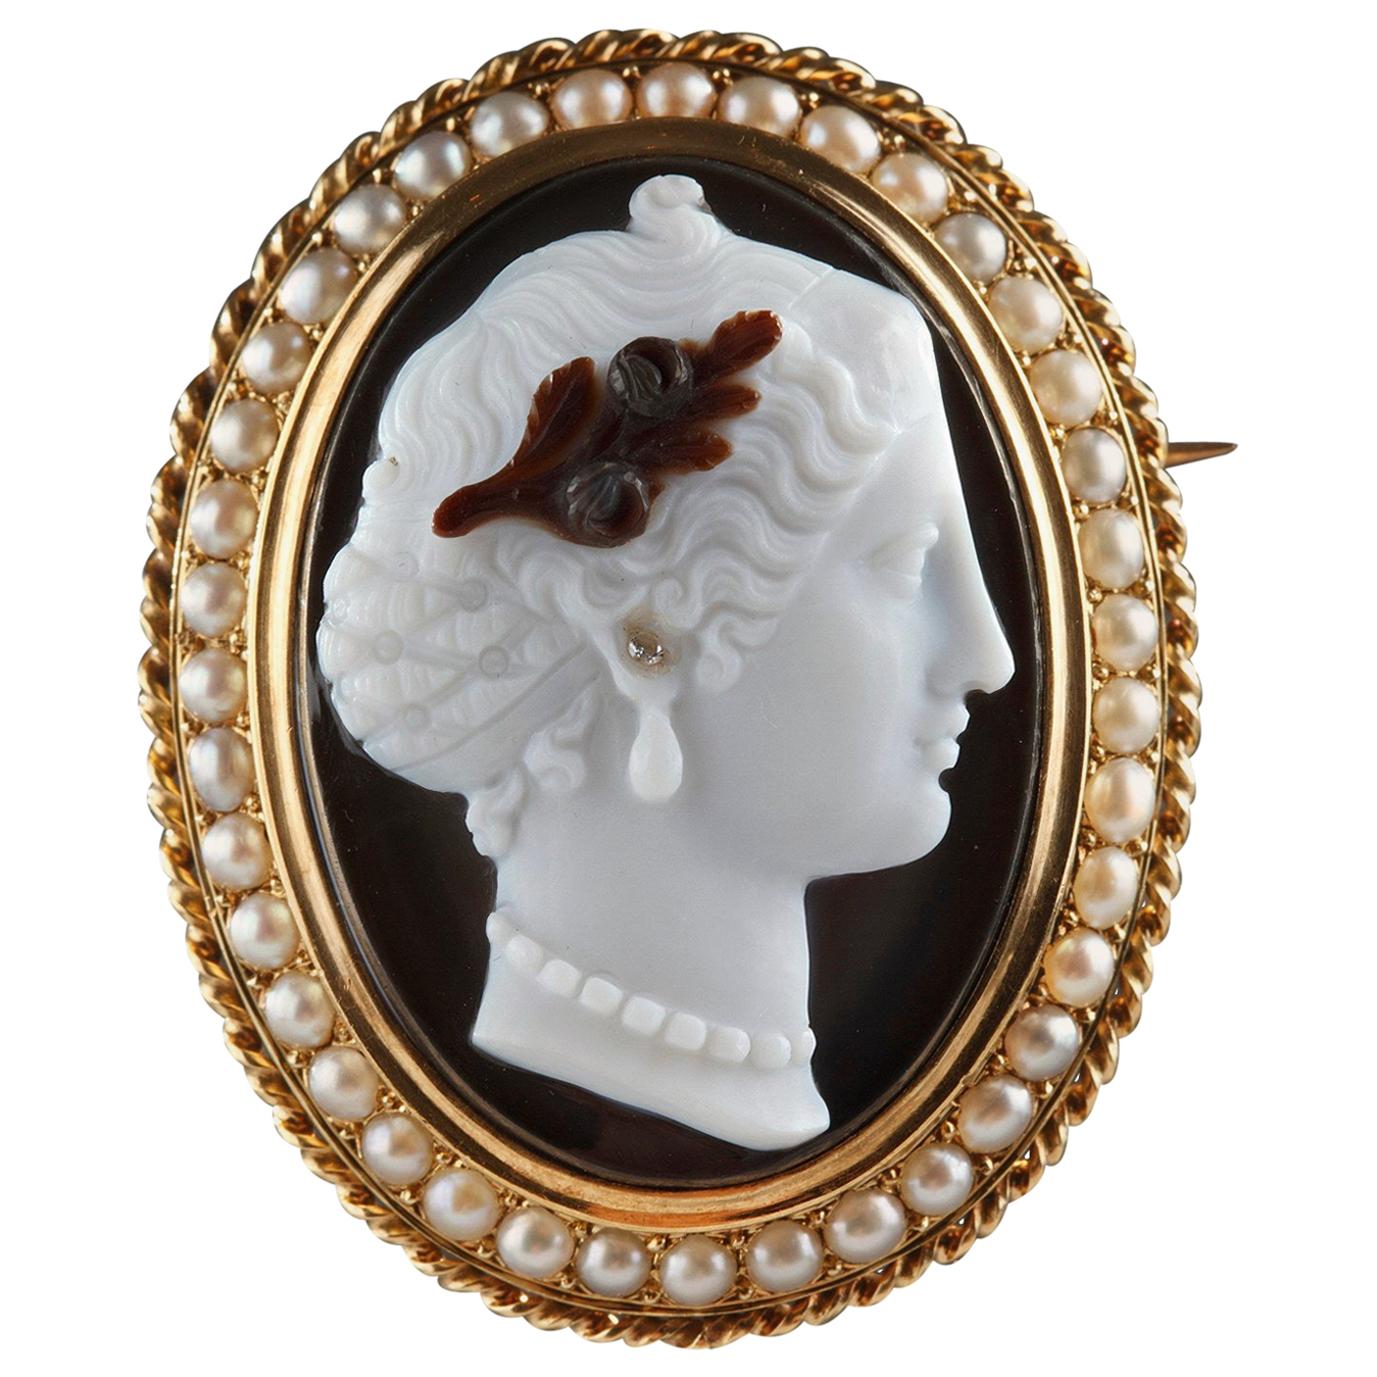 Gold-Mounted Agate Cameo Brooch, Second Part of the 19th Century, Napoleon III